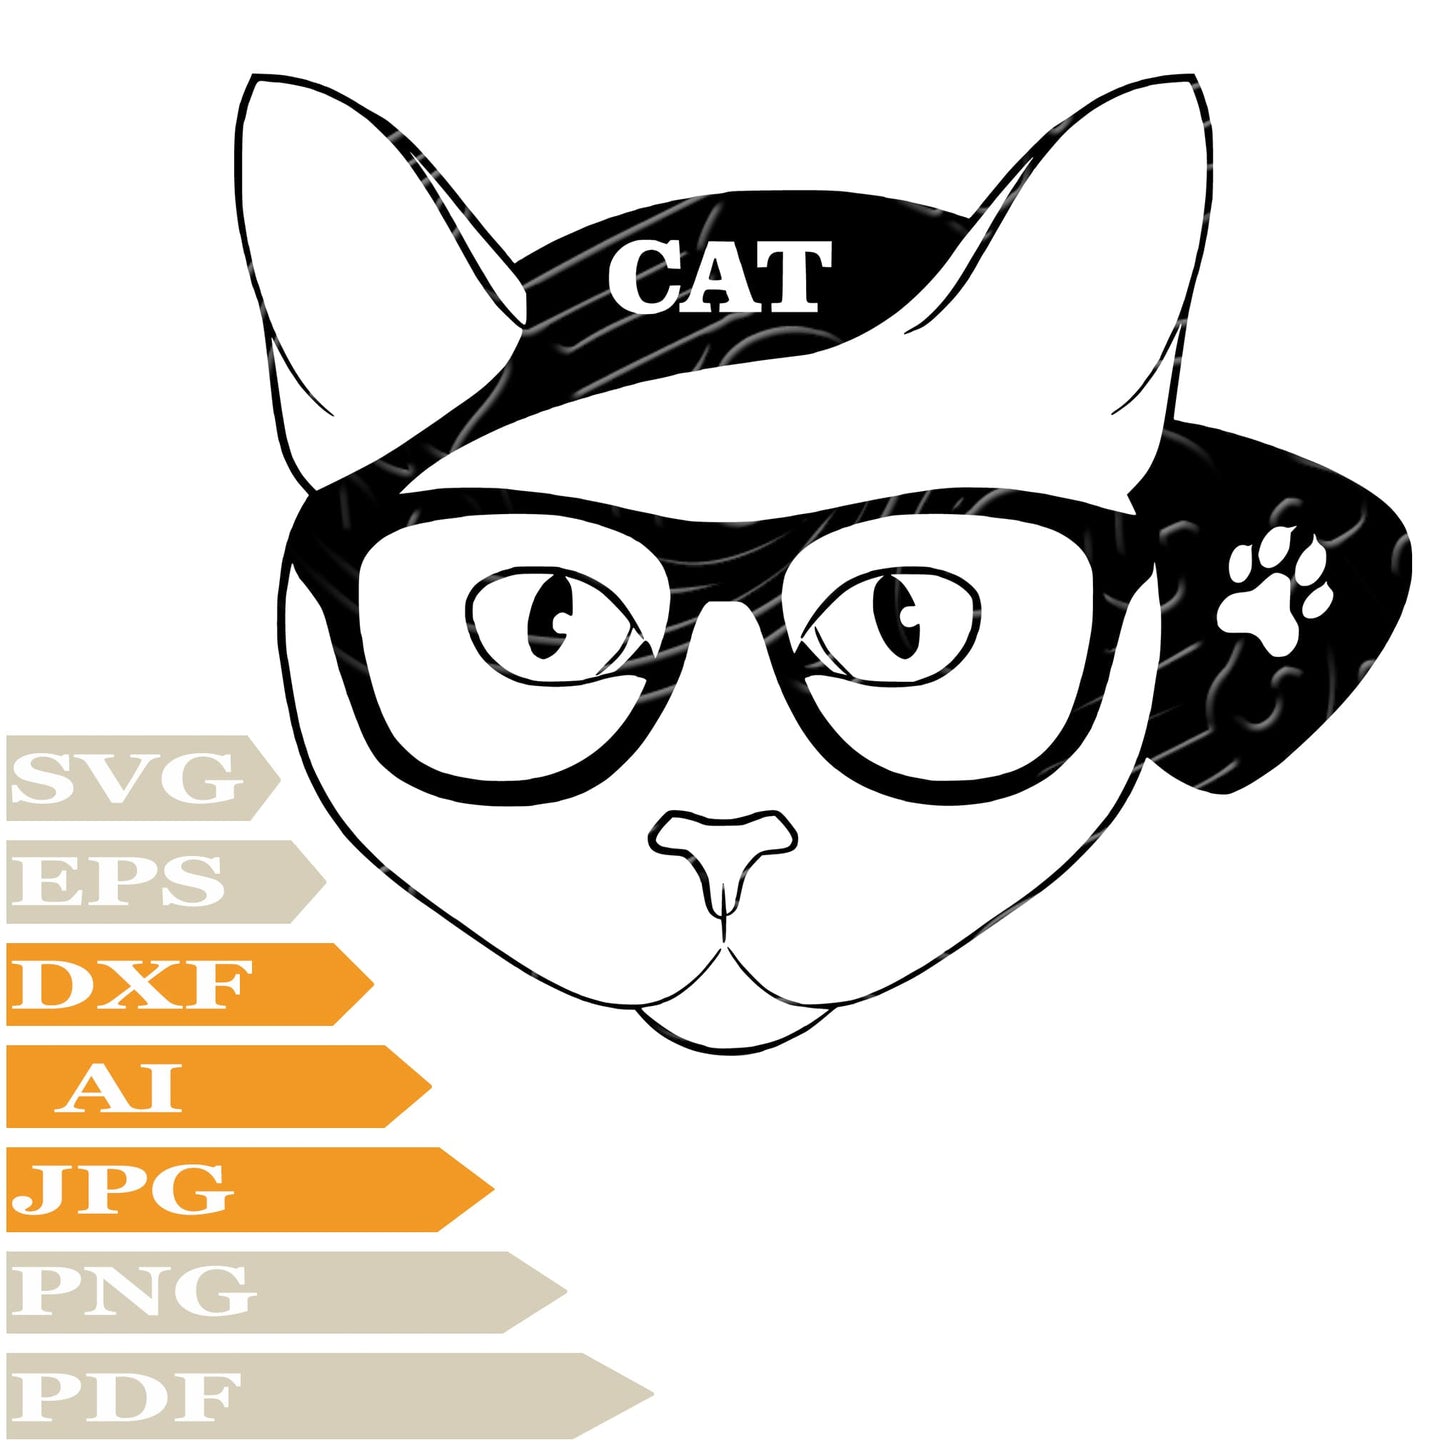 Cat, Cat With Glasses Svg File, Image Cut, Png, For Tattoo, Silhouette, Digital Vector Download, Cut File, Clipart, For Cricut